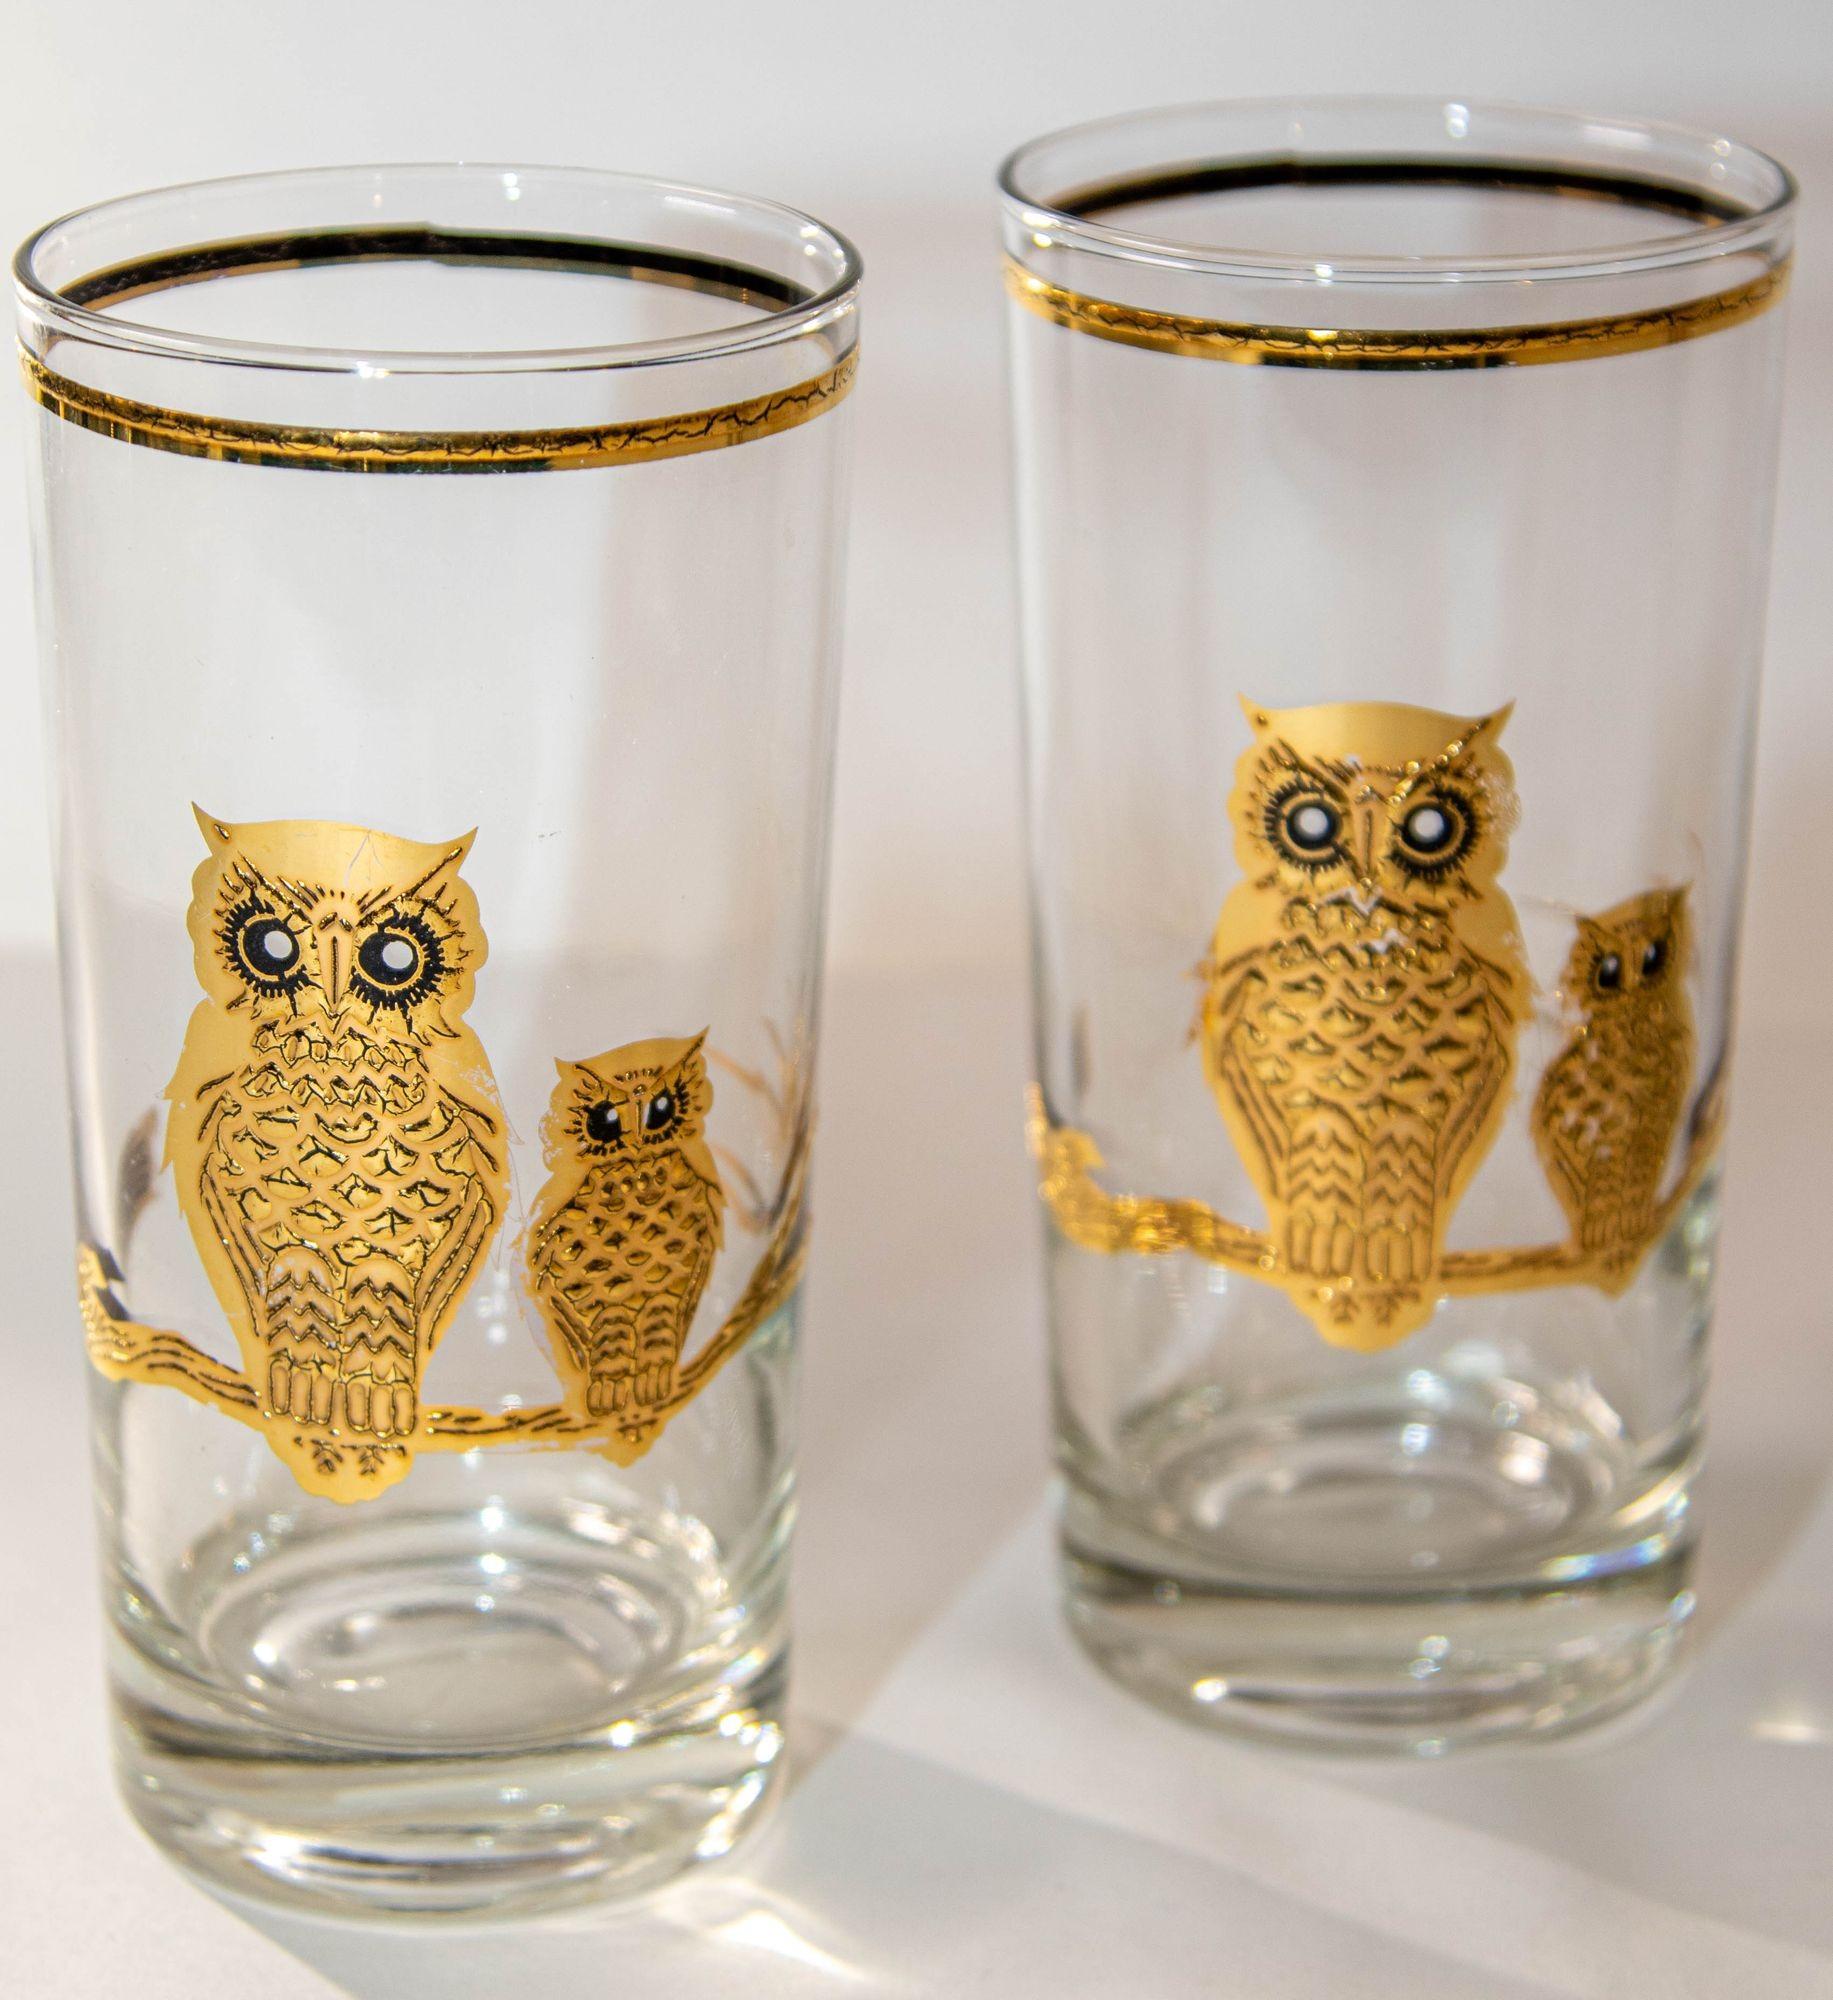 1950's Vintage Culver Ltd Highball Drinking Glasses with 22K Gold Owls Set of 6 For Sale 5